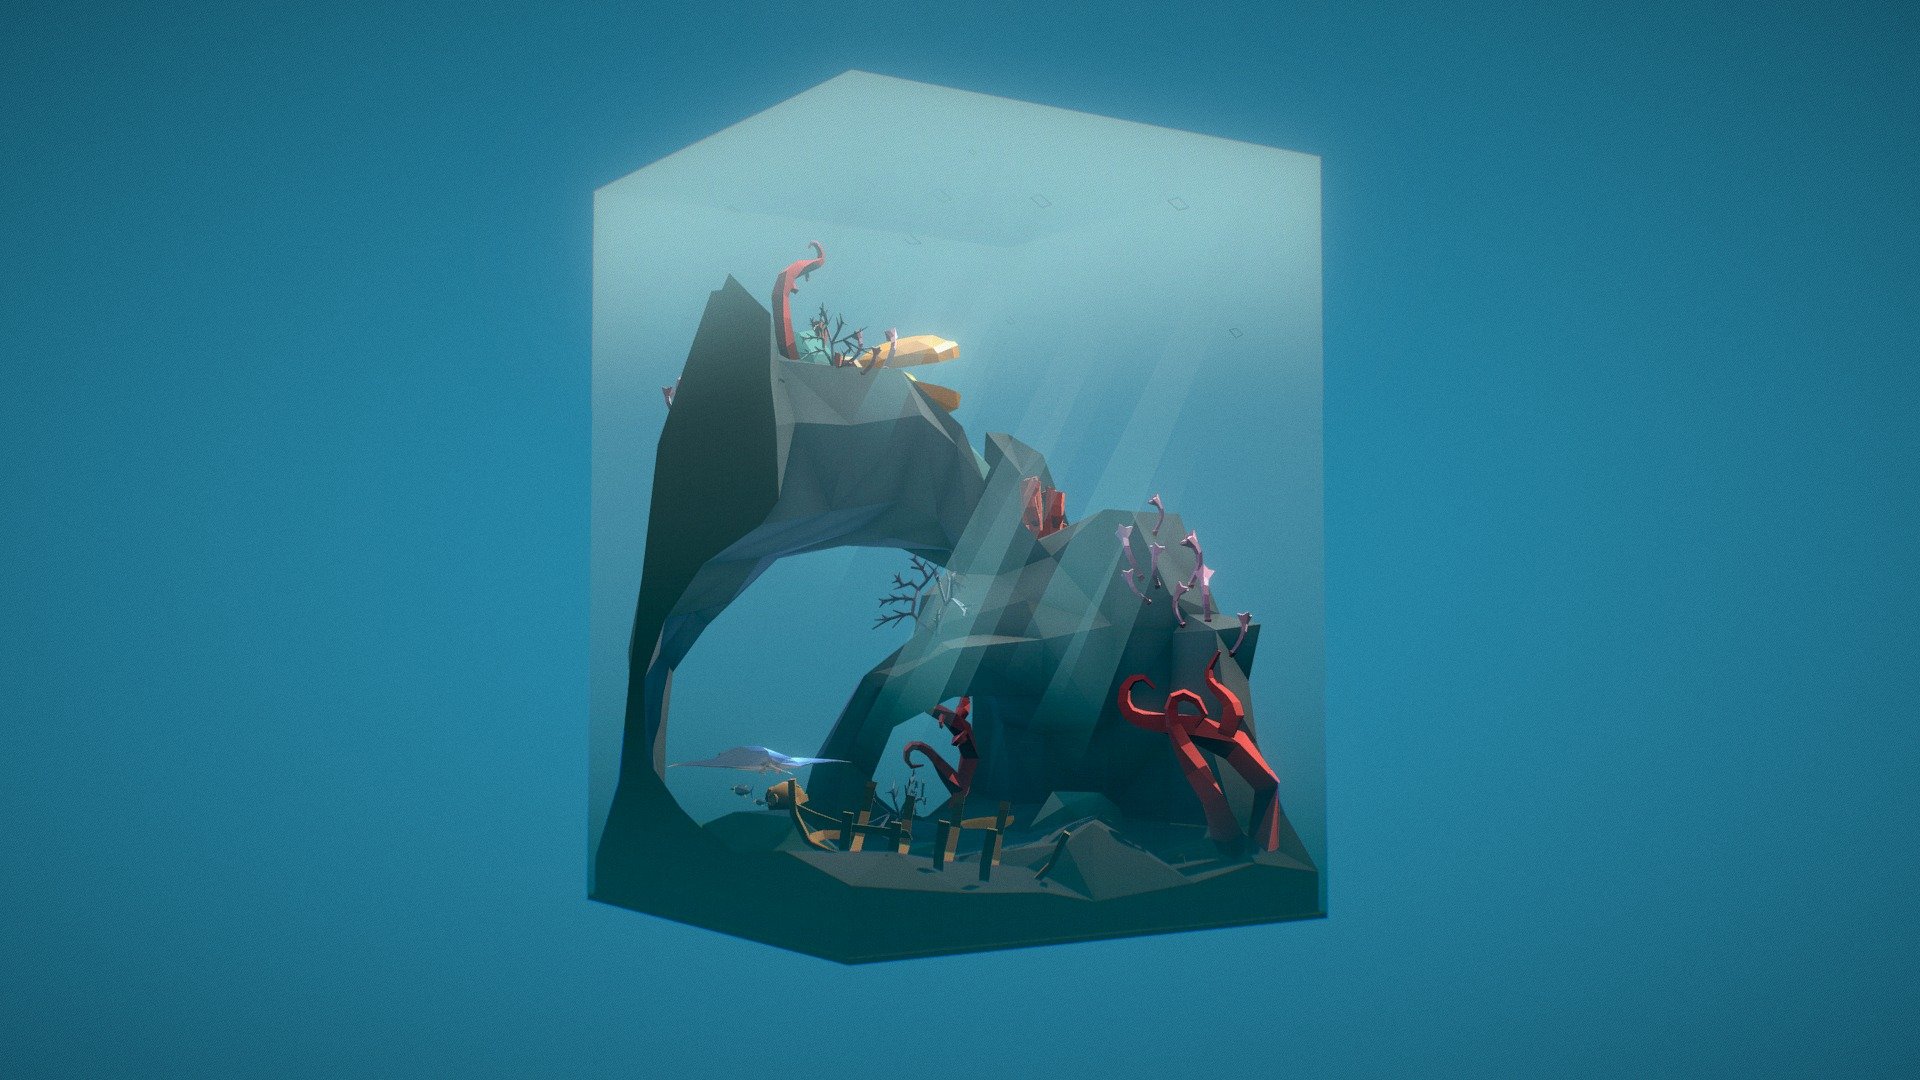 Specially for Sketchfab Low Poly Challenge: Sea Life
Low Poly: 15K Triangles
Song: Yung Life - Zyyyther - Ocean Zintra - 3D model by Efim Savelev (@efimsavelev0) 3d model